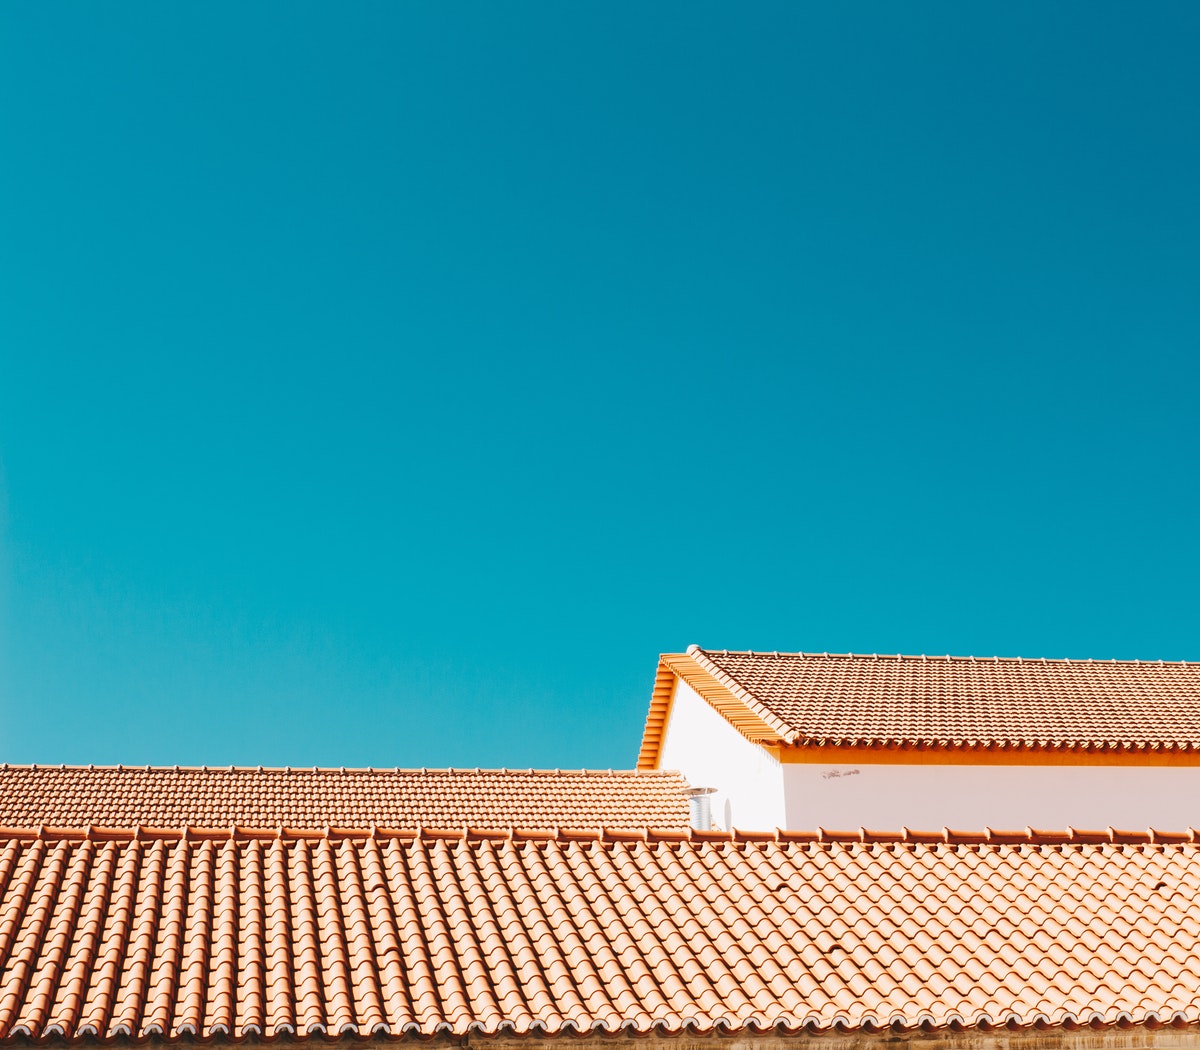 7 ways to generate more roofing leads.